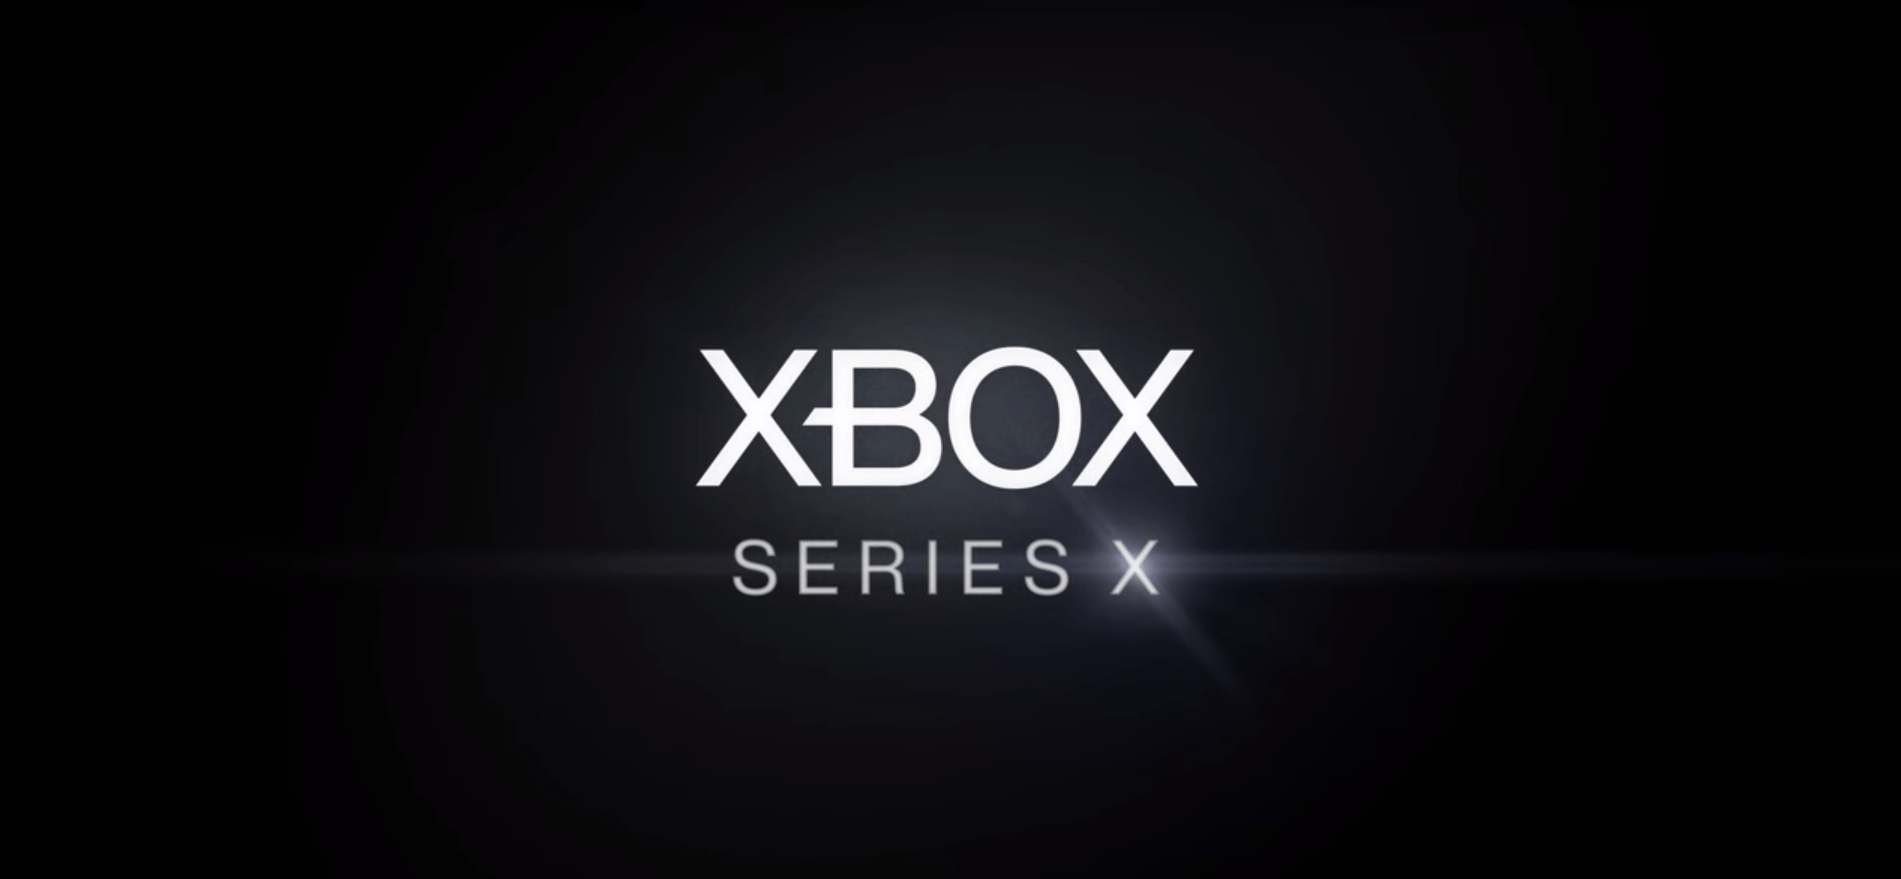 Microsoft Announces the Newest Xbox Console During 2019 Game Awards, the Xbox Series X